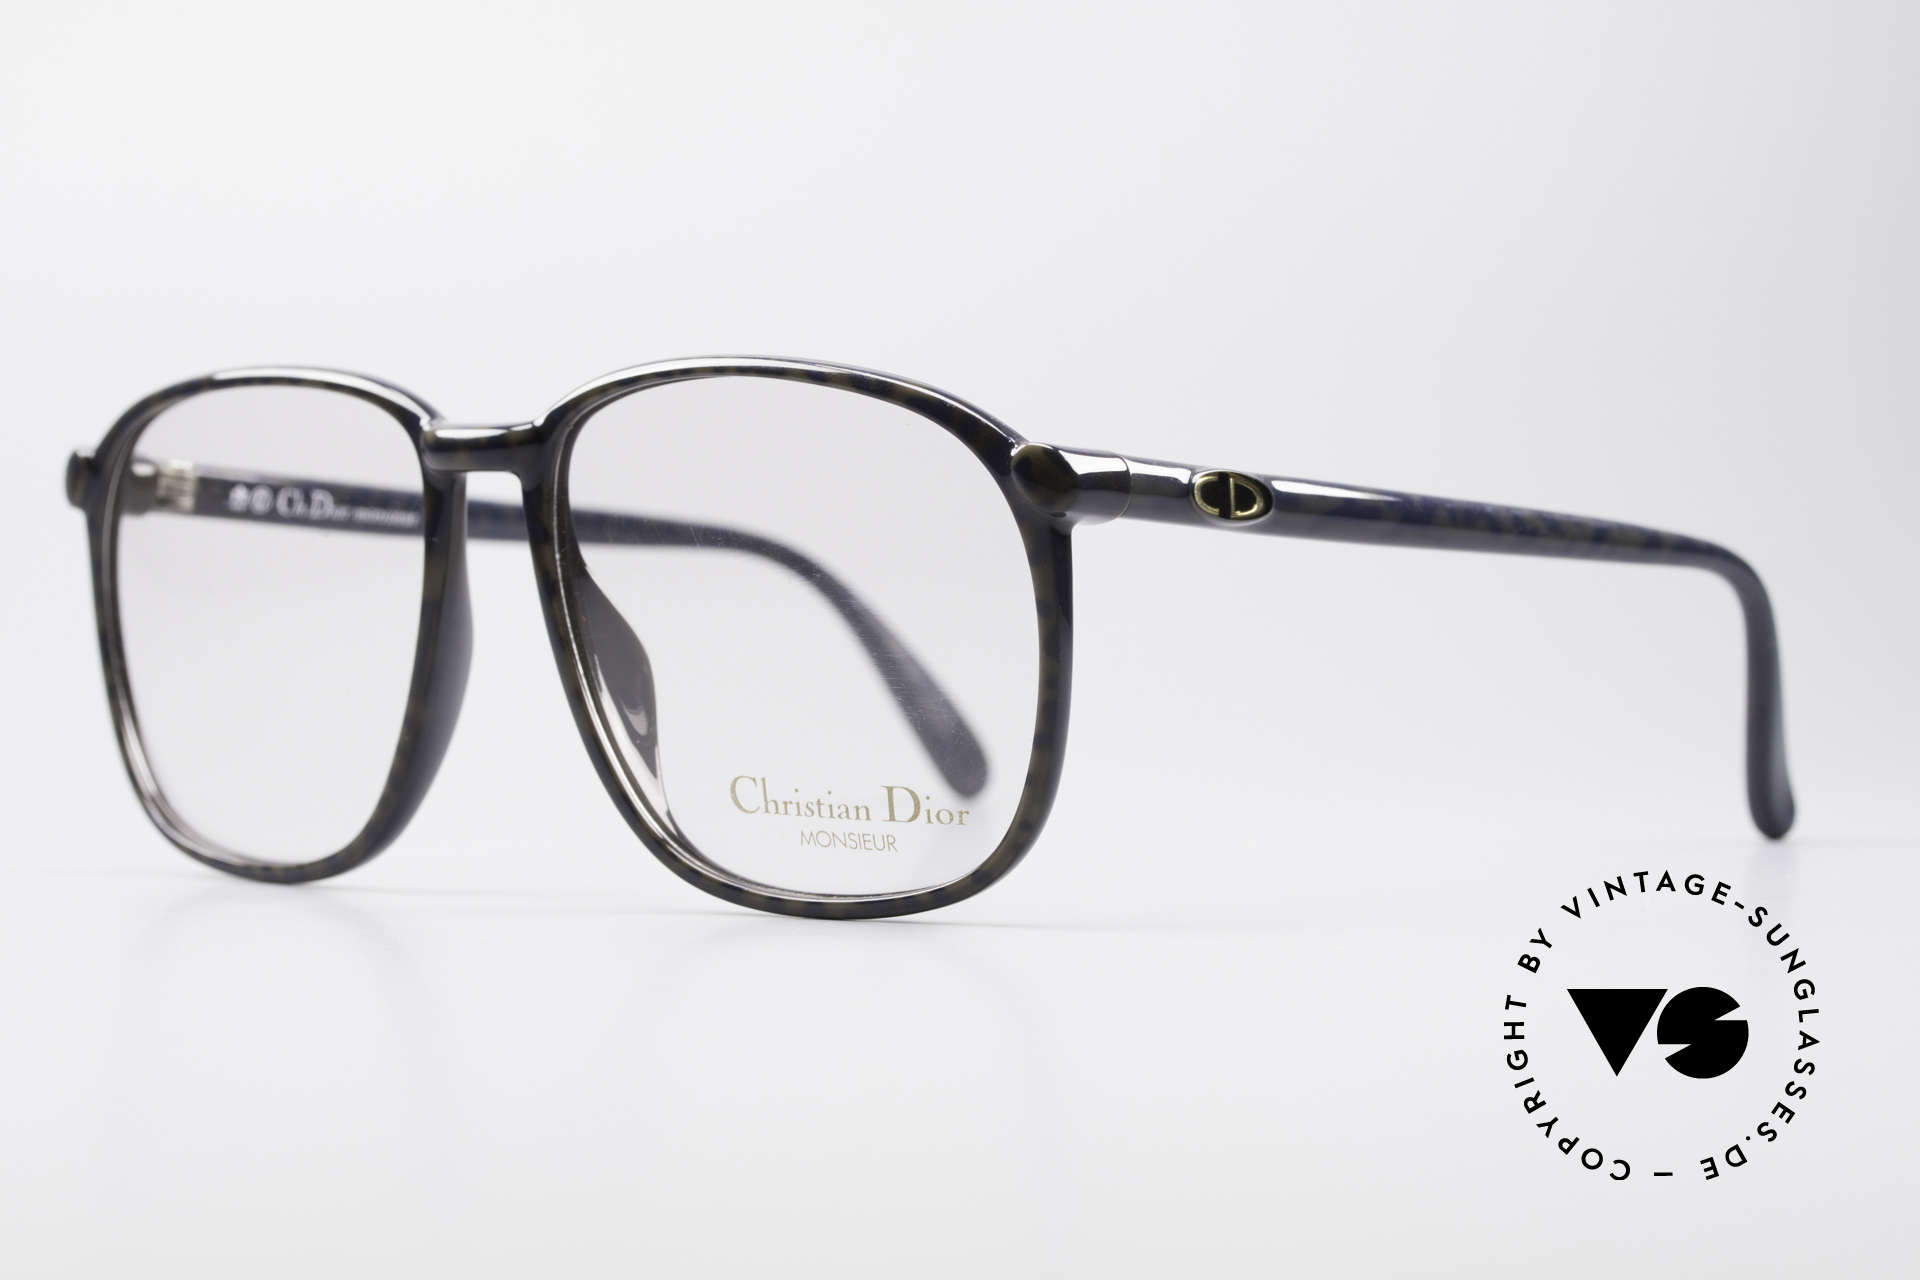 Christian Dior 2341 80's Optyl Monsieur Glasses, very noble men's frame with discreet coloring/pattern, Made for Men